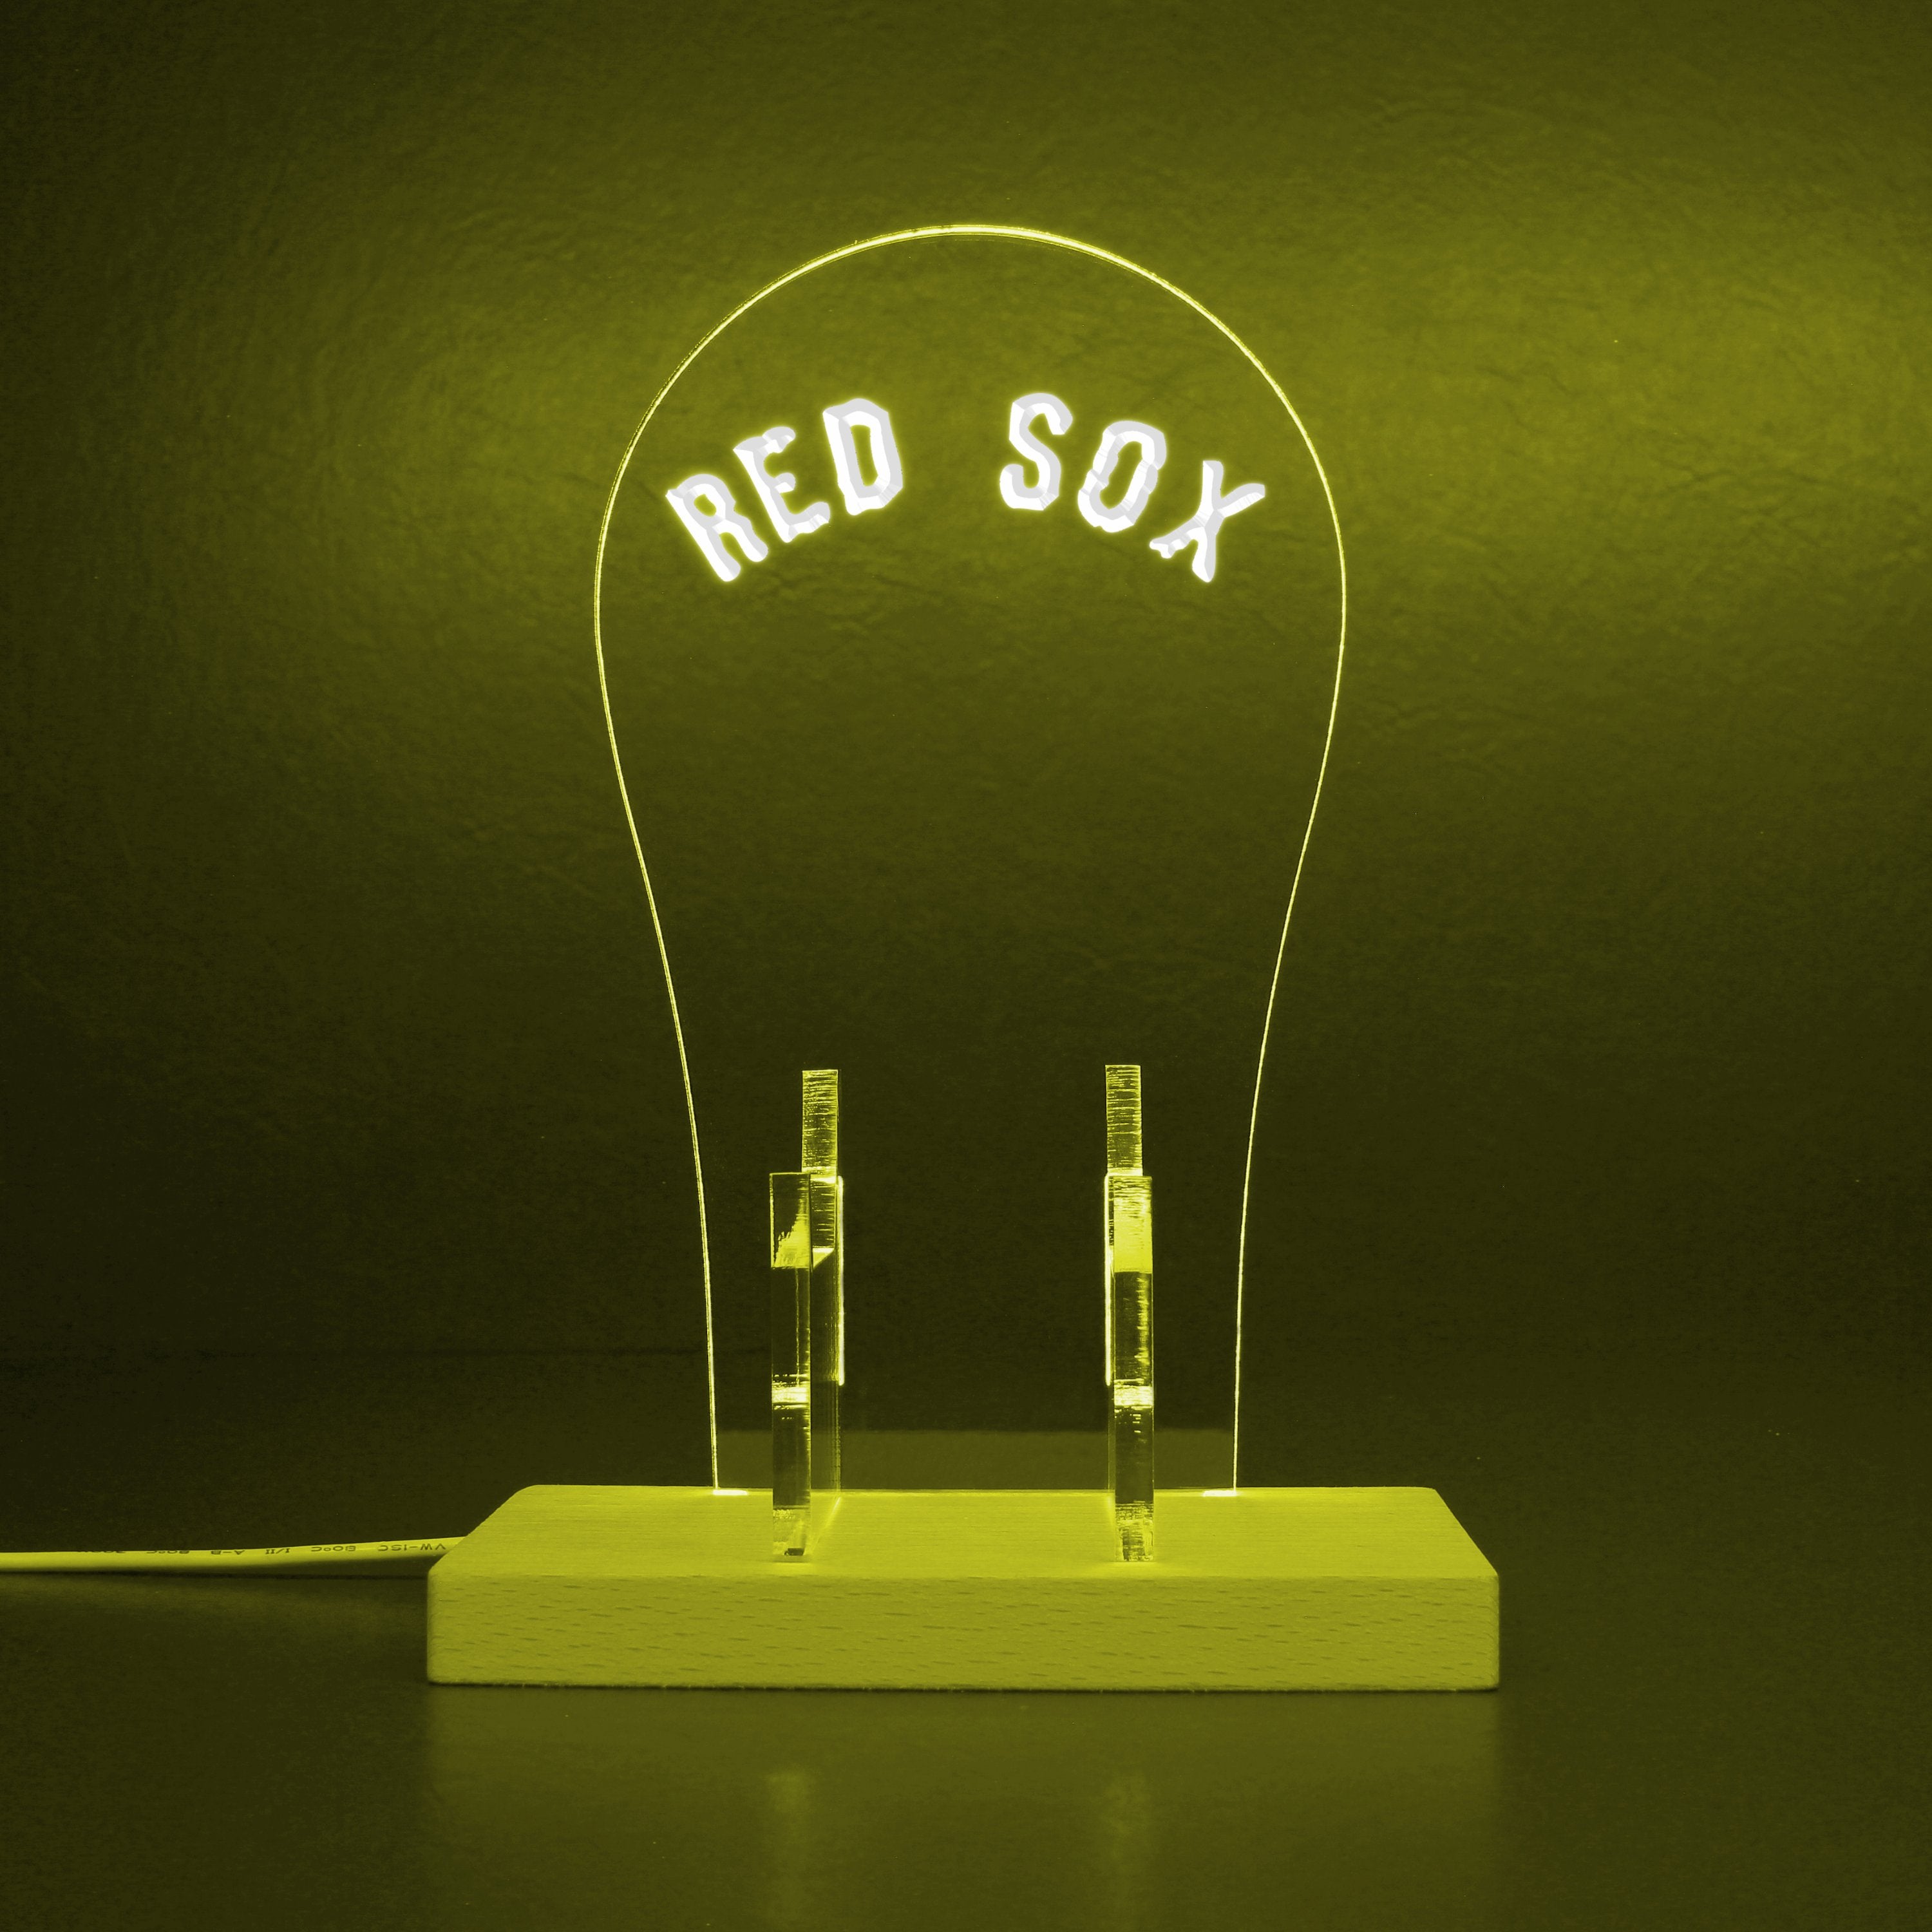 Boston Red Sox Jersey Logos RGB LED Gaming Headset Controller Stand